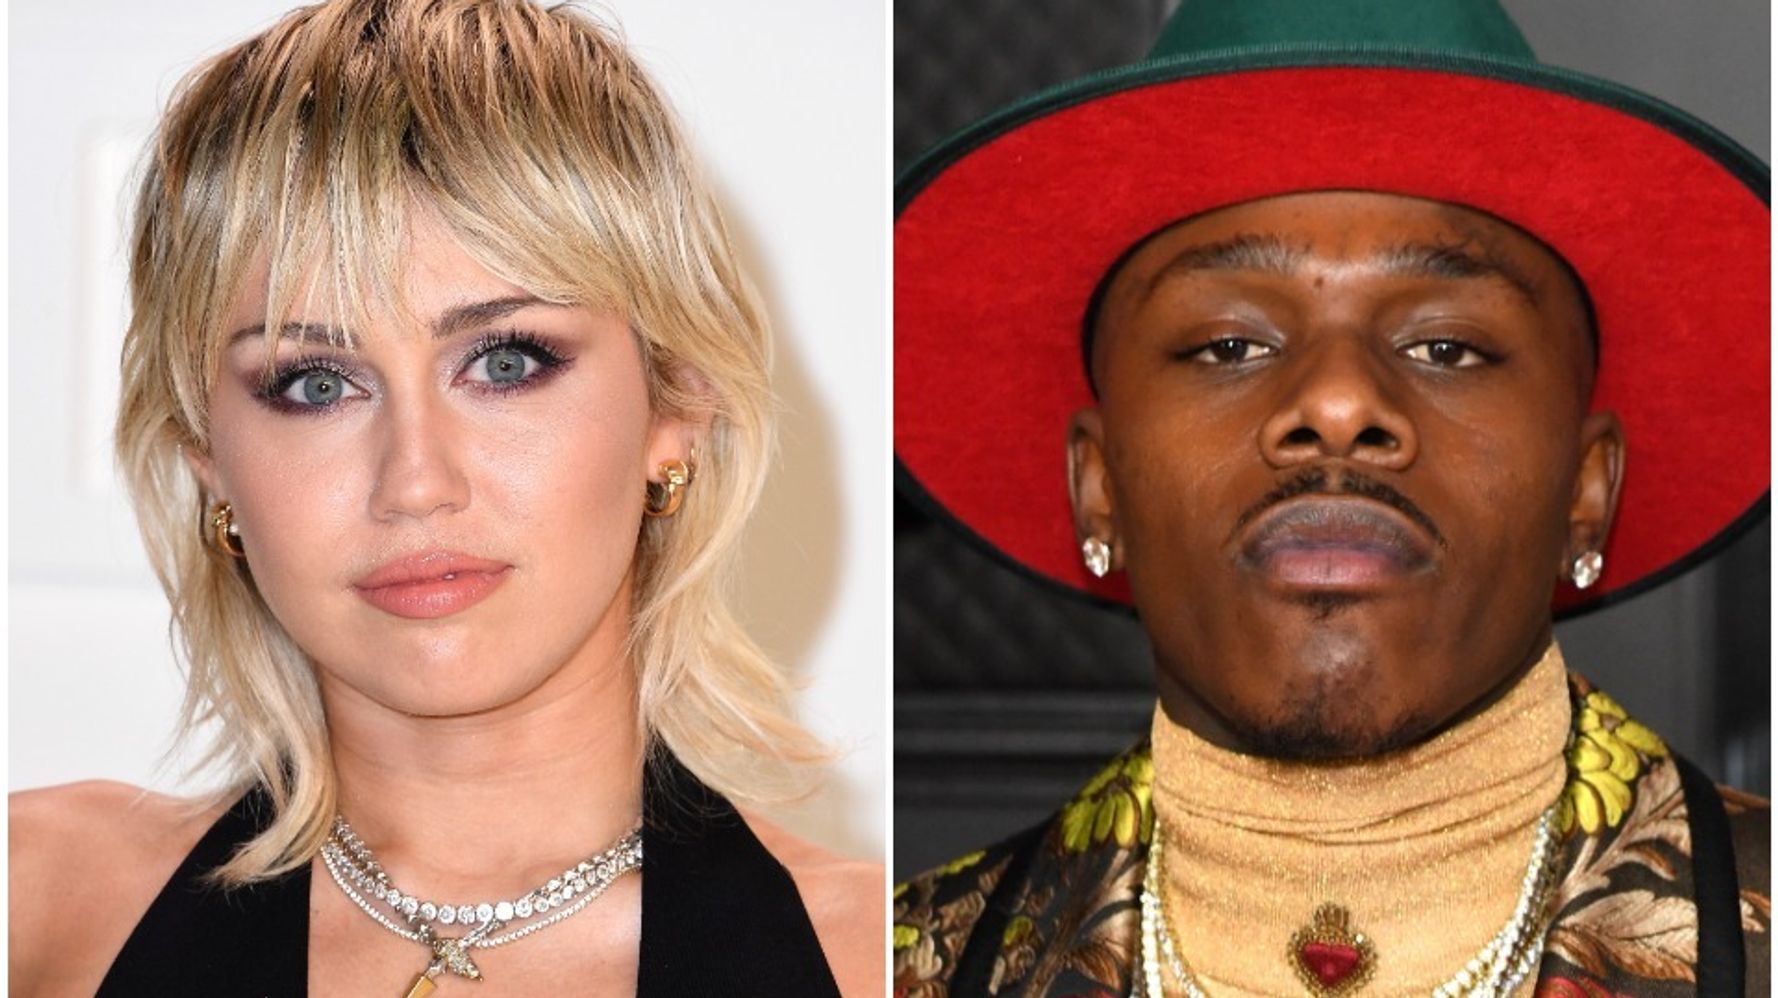 Miley Cyrus Reaches Out To DaBaby Amid Backlash: 'Knowledge Is Power!'